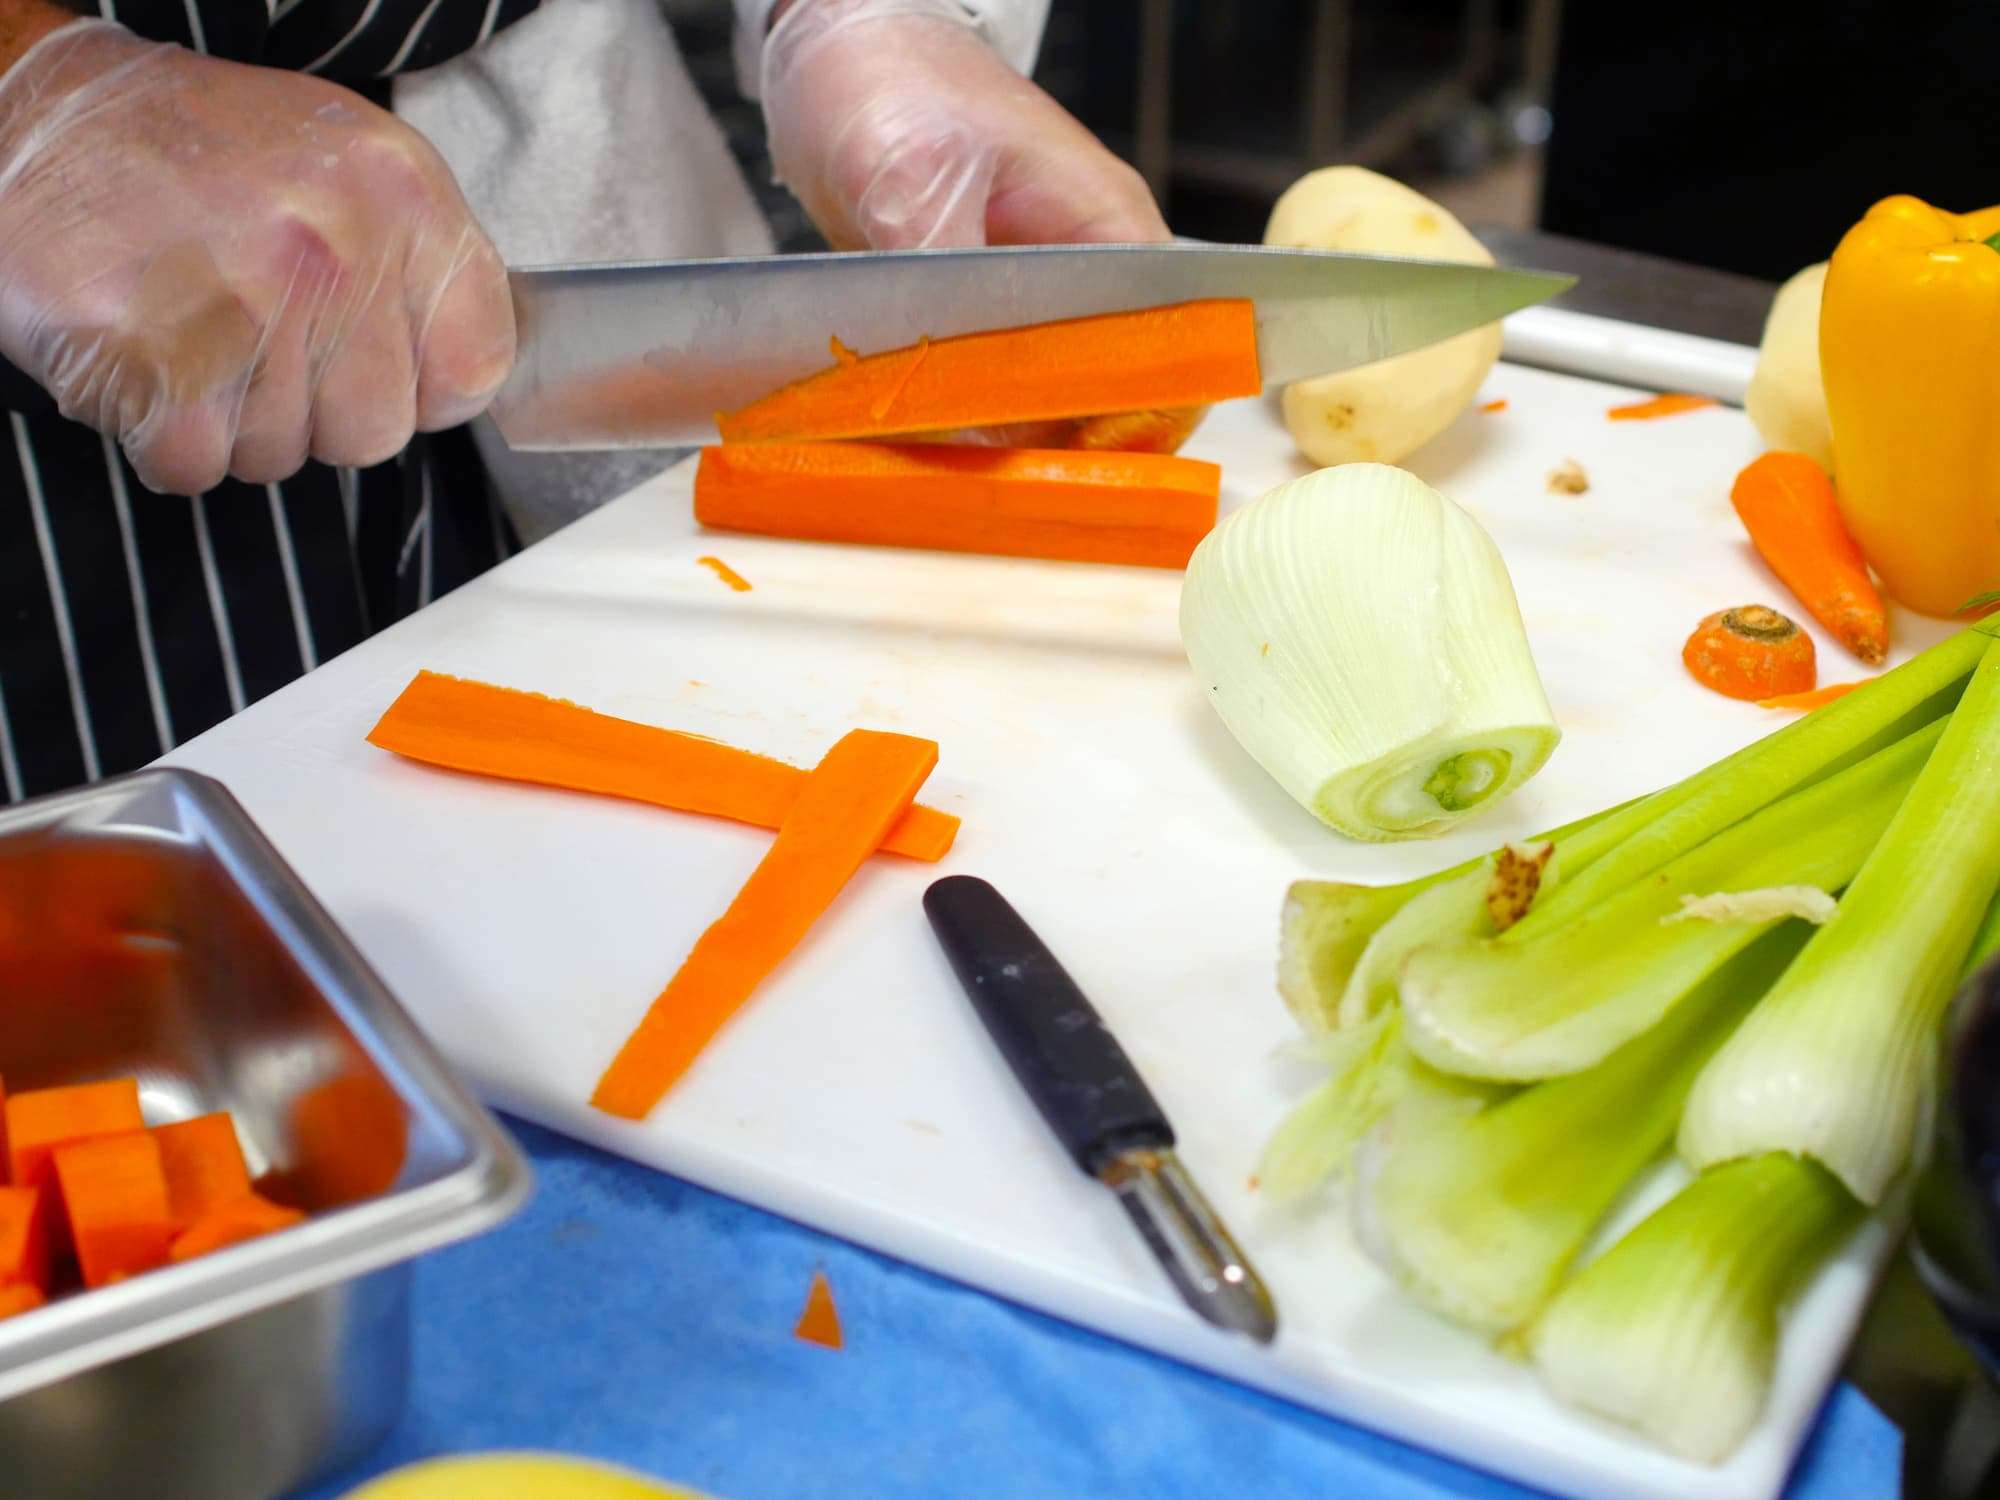 A close-up of a variety of vegetables being prepared: sliced carrots, celery, peeled potatoes, and a sweet pepper.